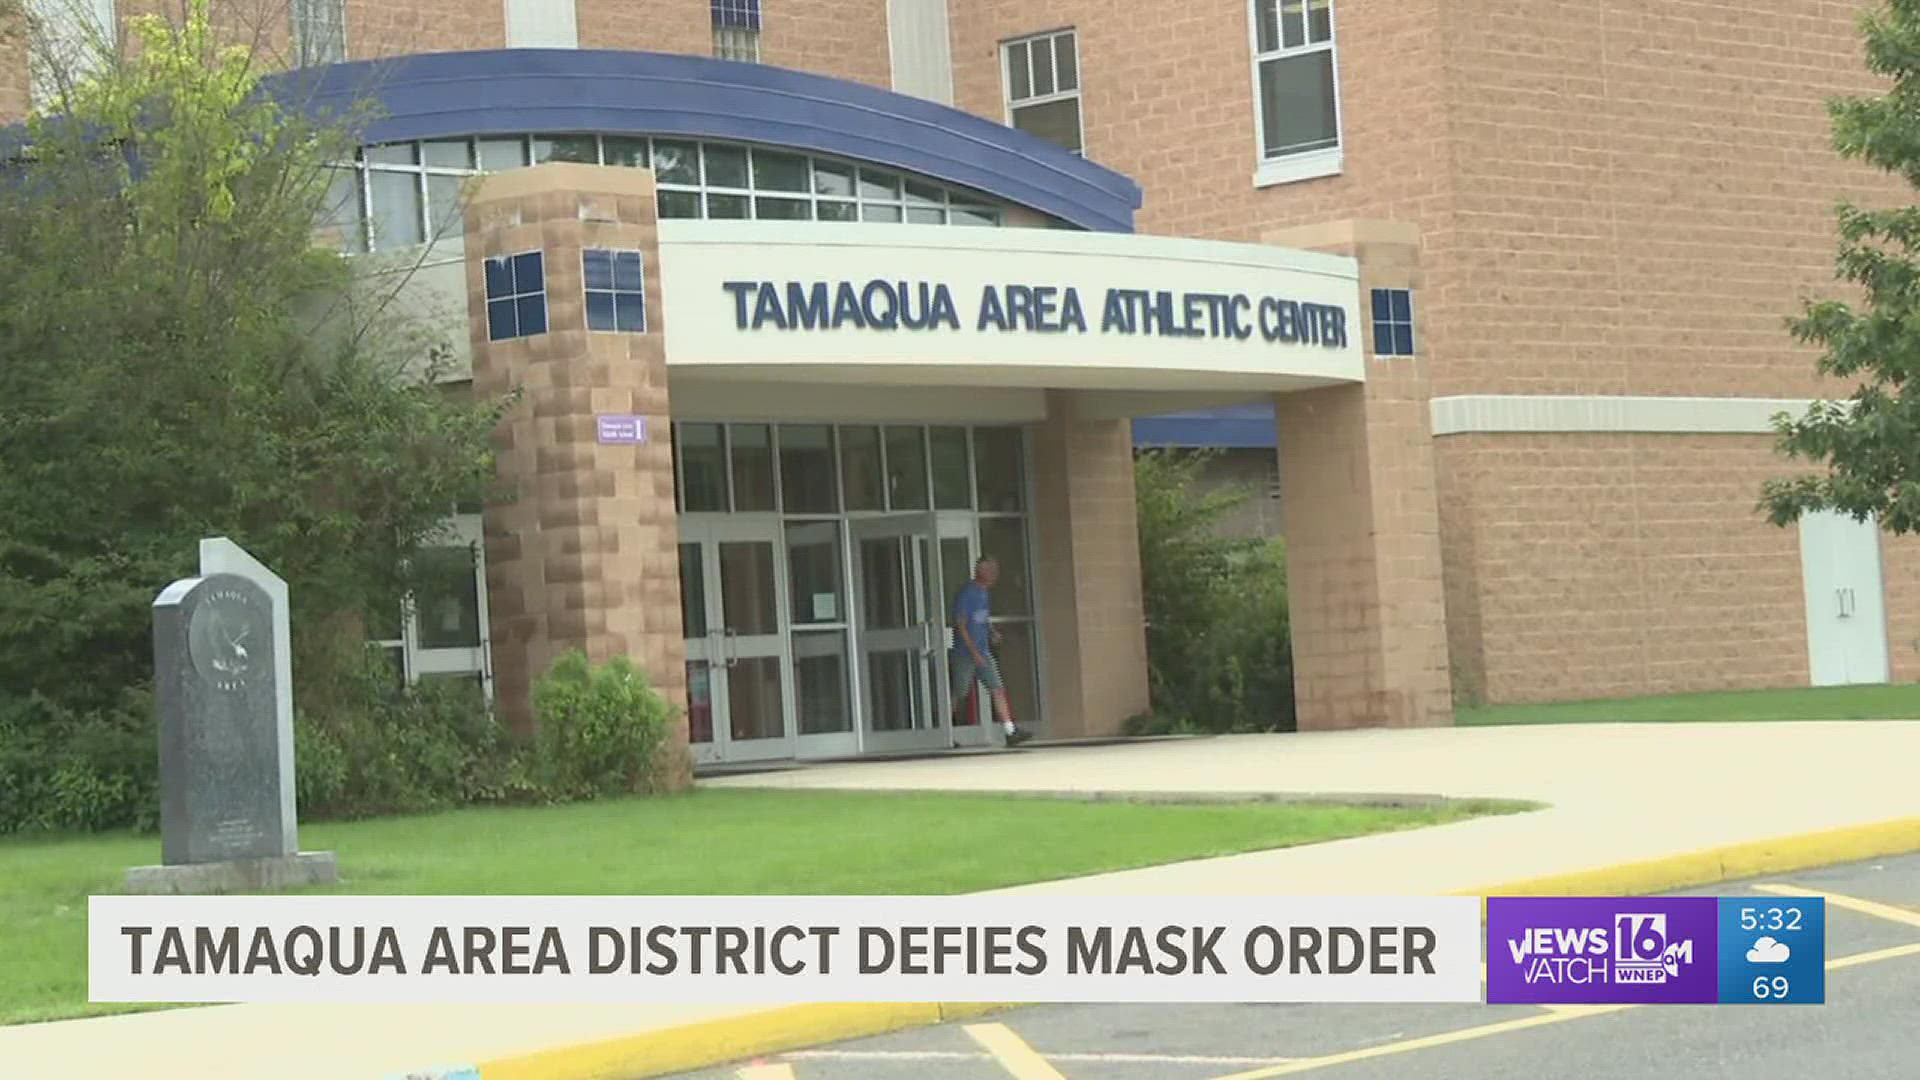 School board members voted in a special meeting, Thursday night to continue to have masks optional saying it's in the best interest of the students.